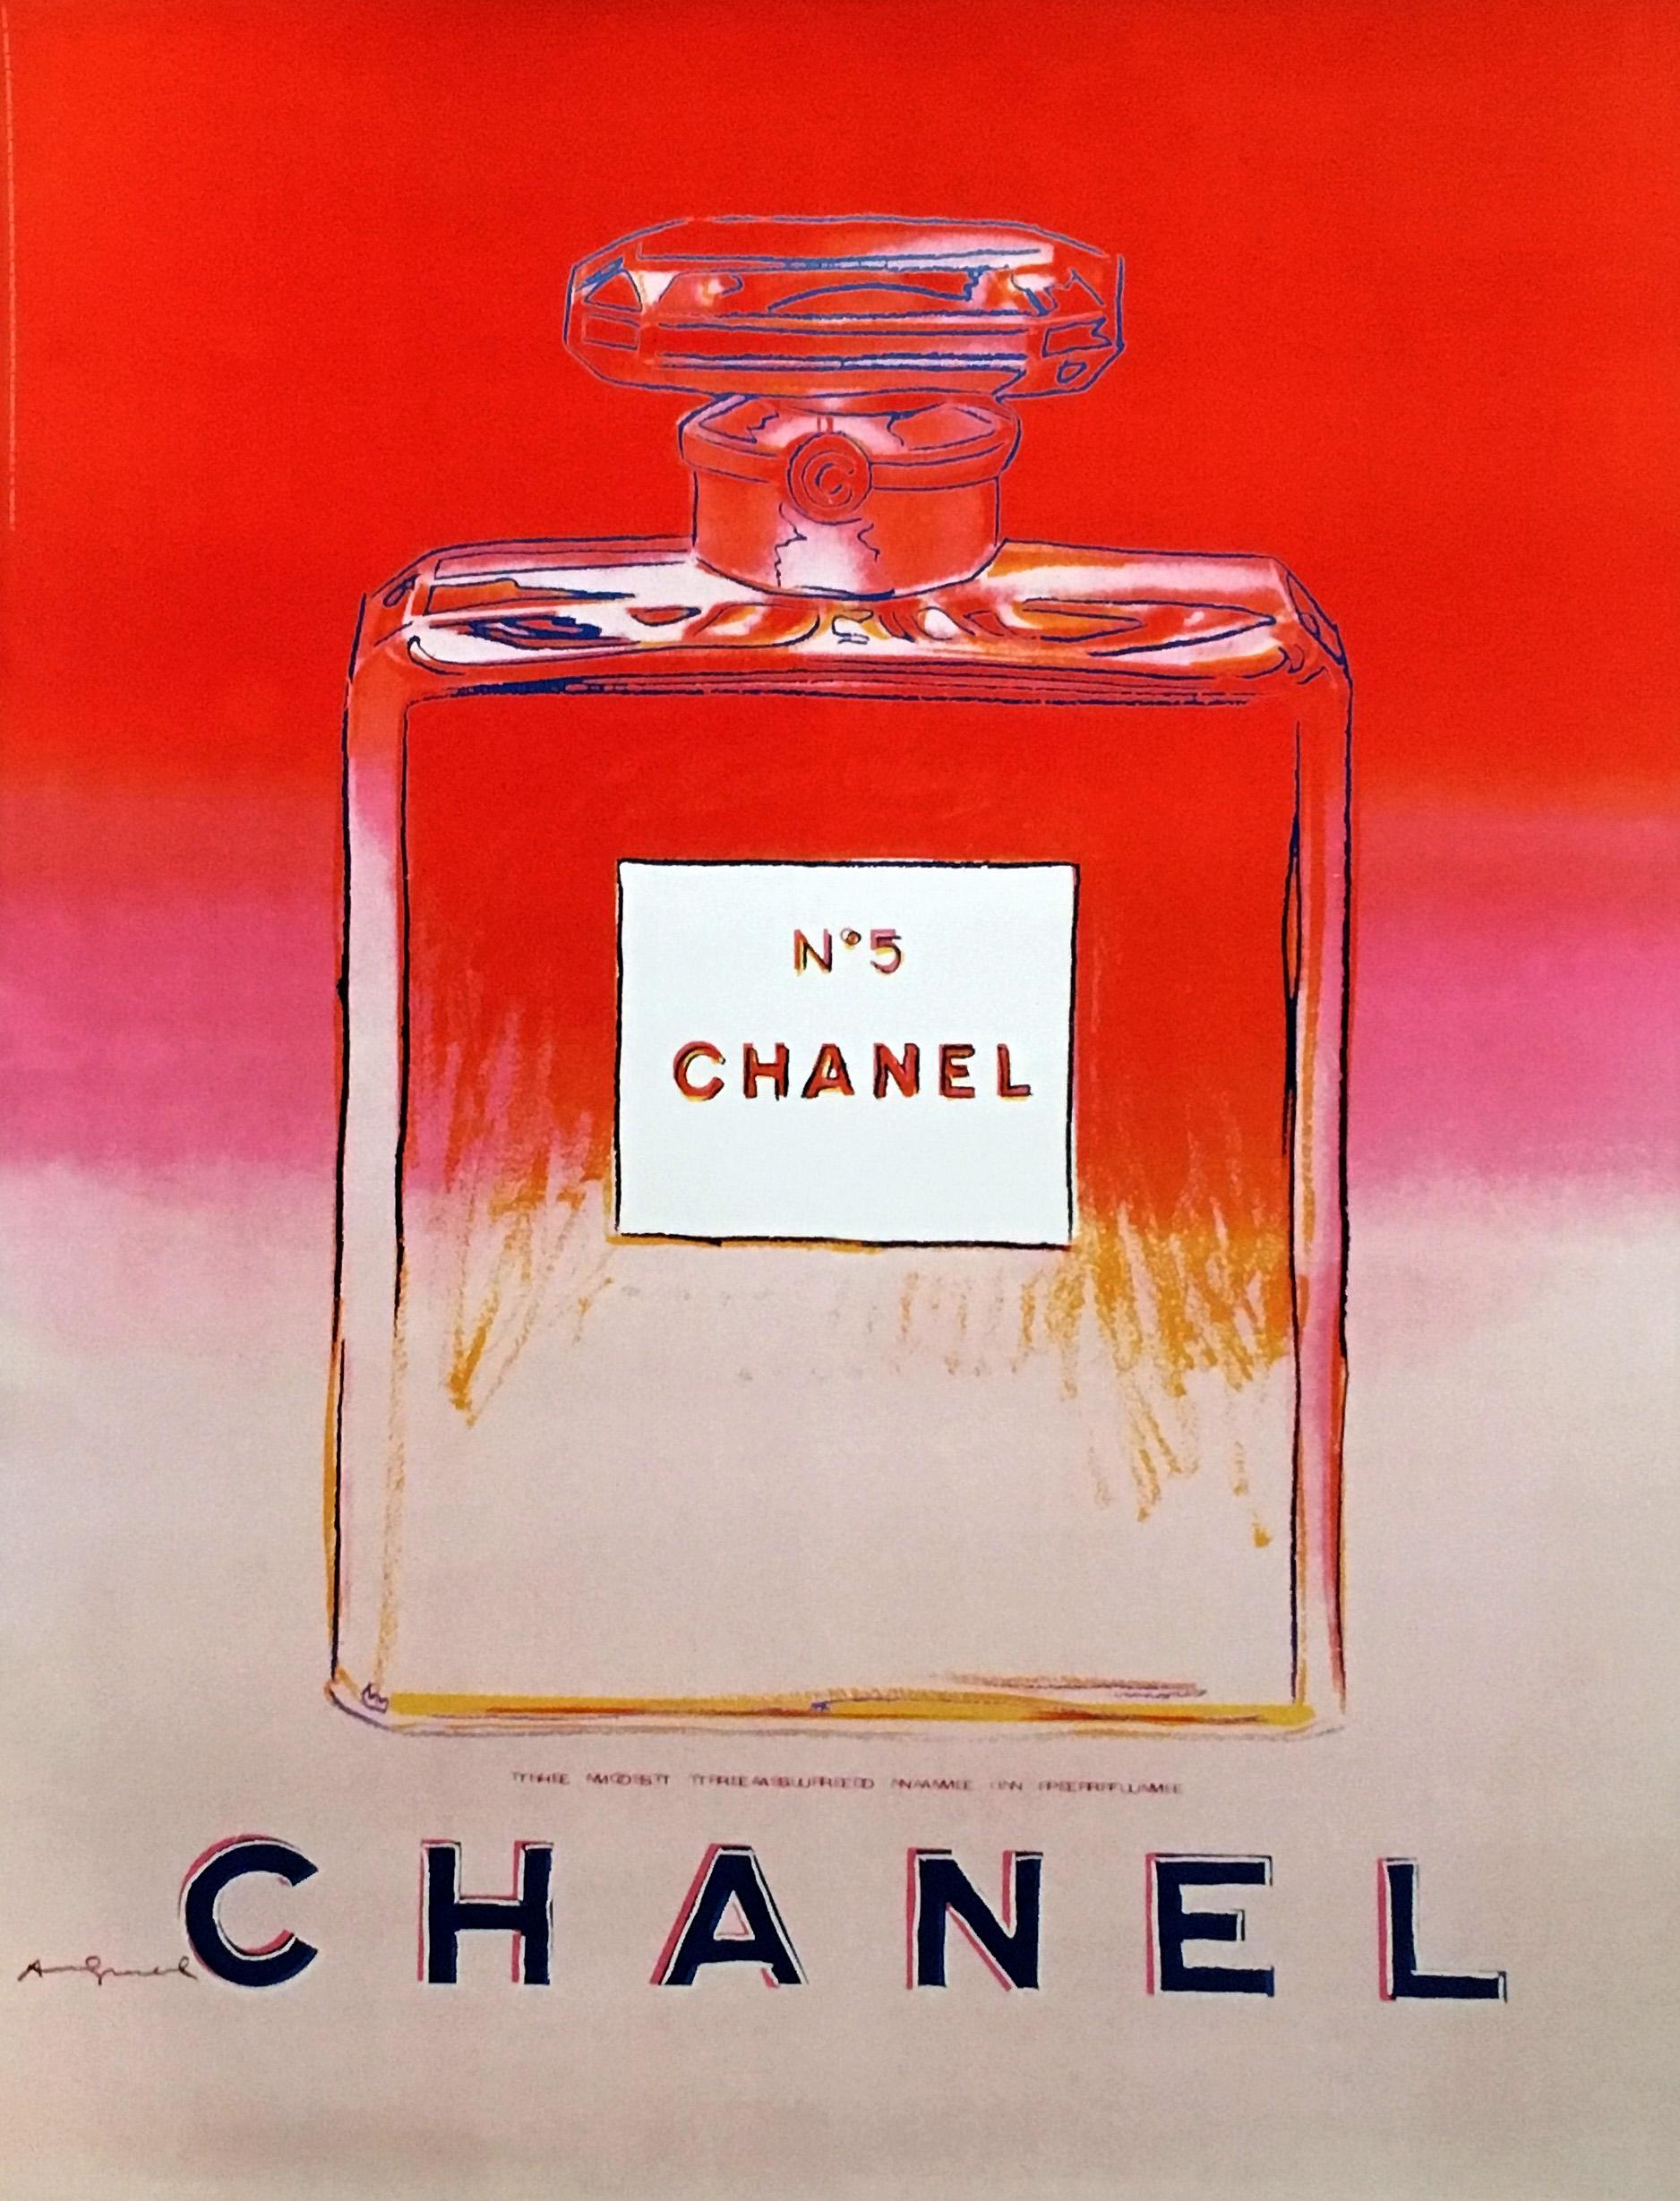 Chanel No. 5 Advertising Campaign Poster  - Art by (after) Andy Warhol